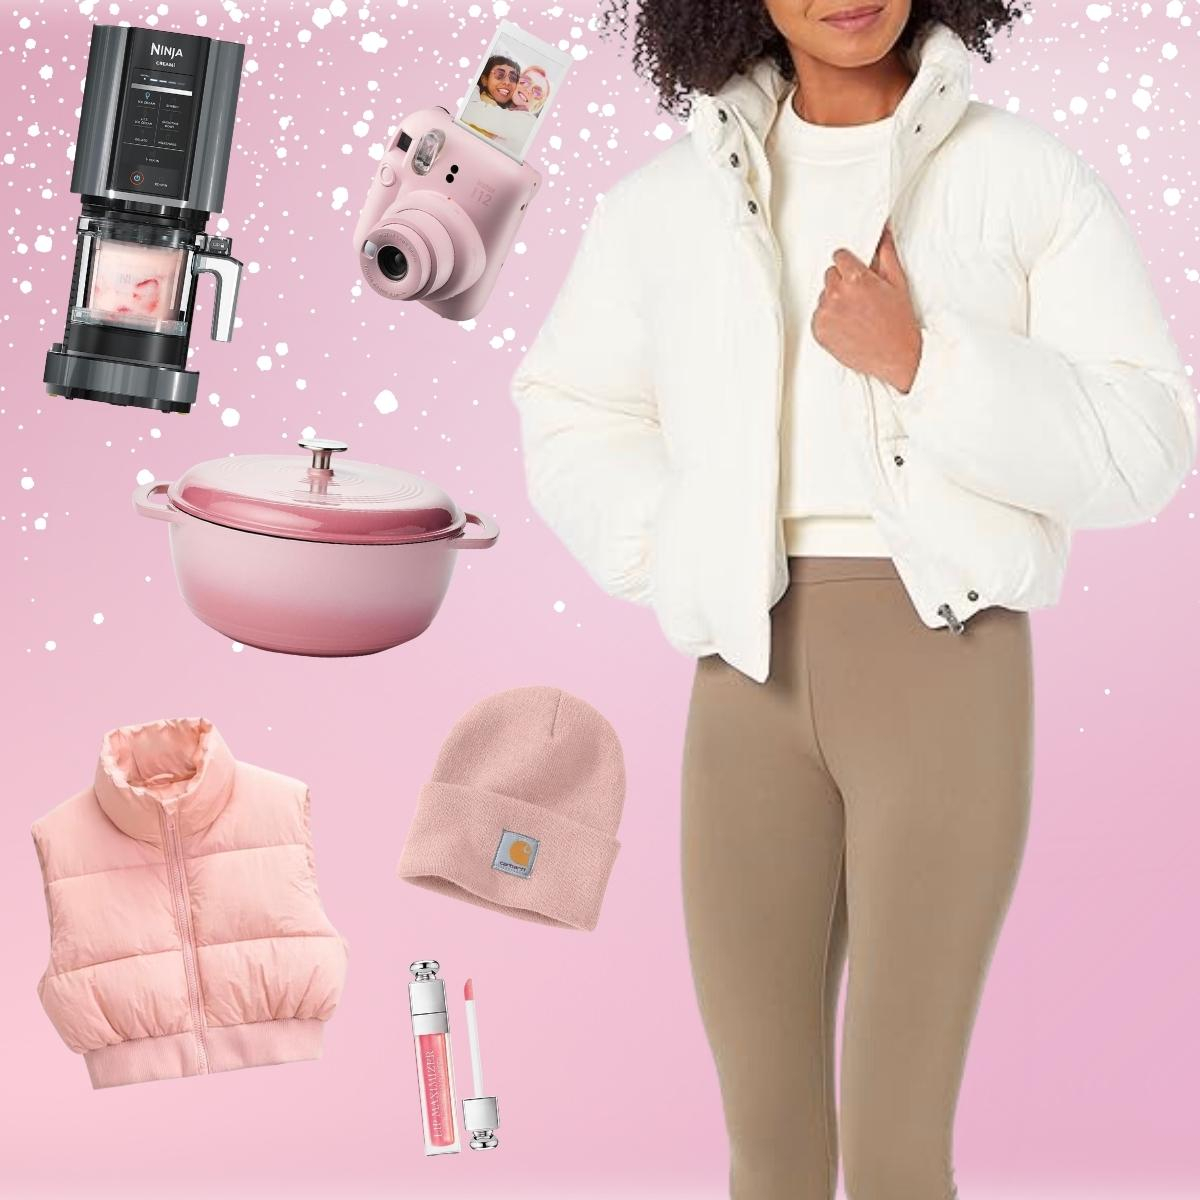 Winter Aesthetic GIFTS OF THE SEASON